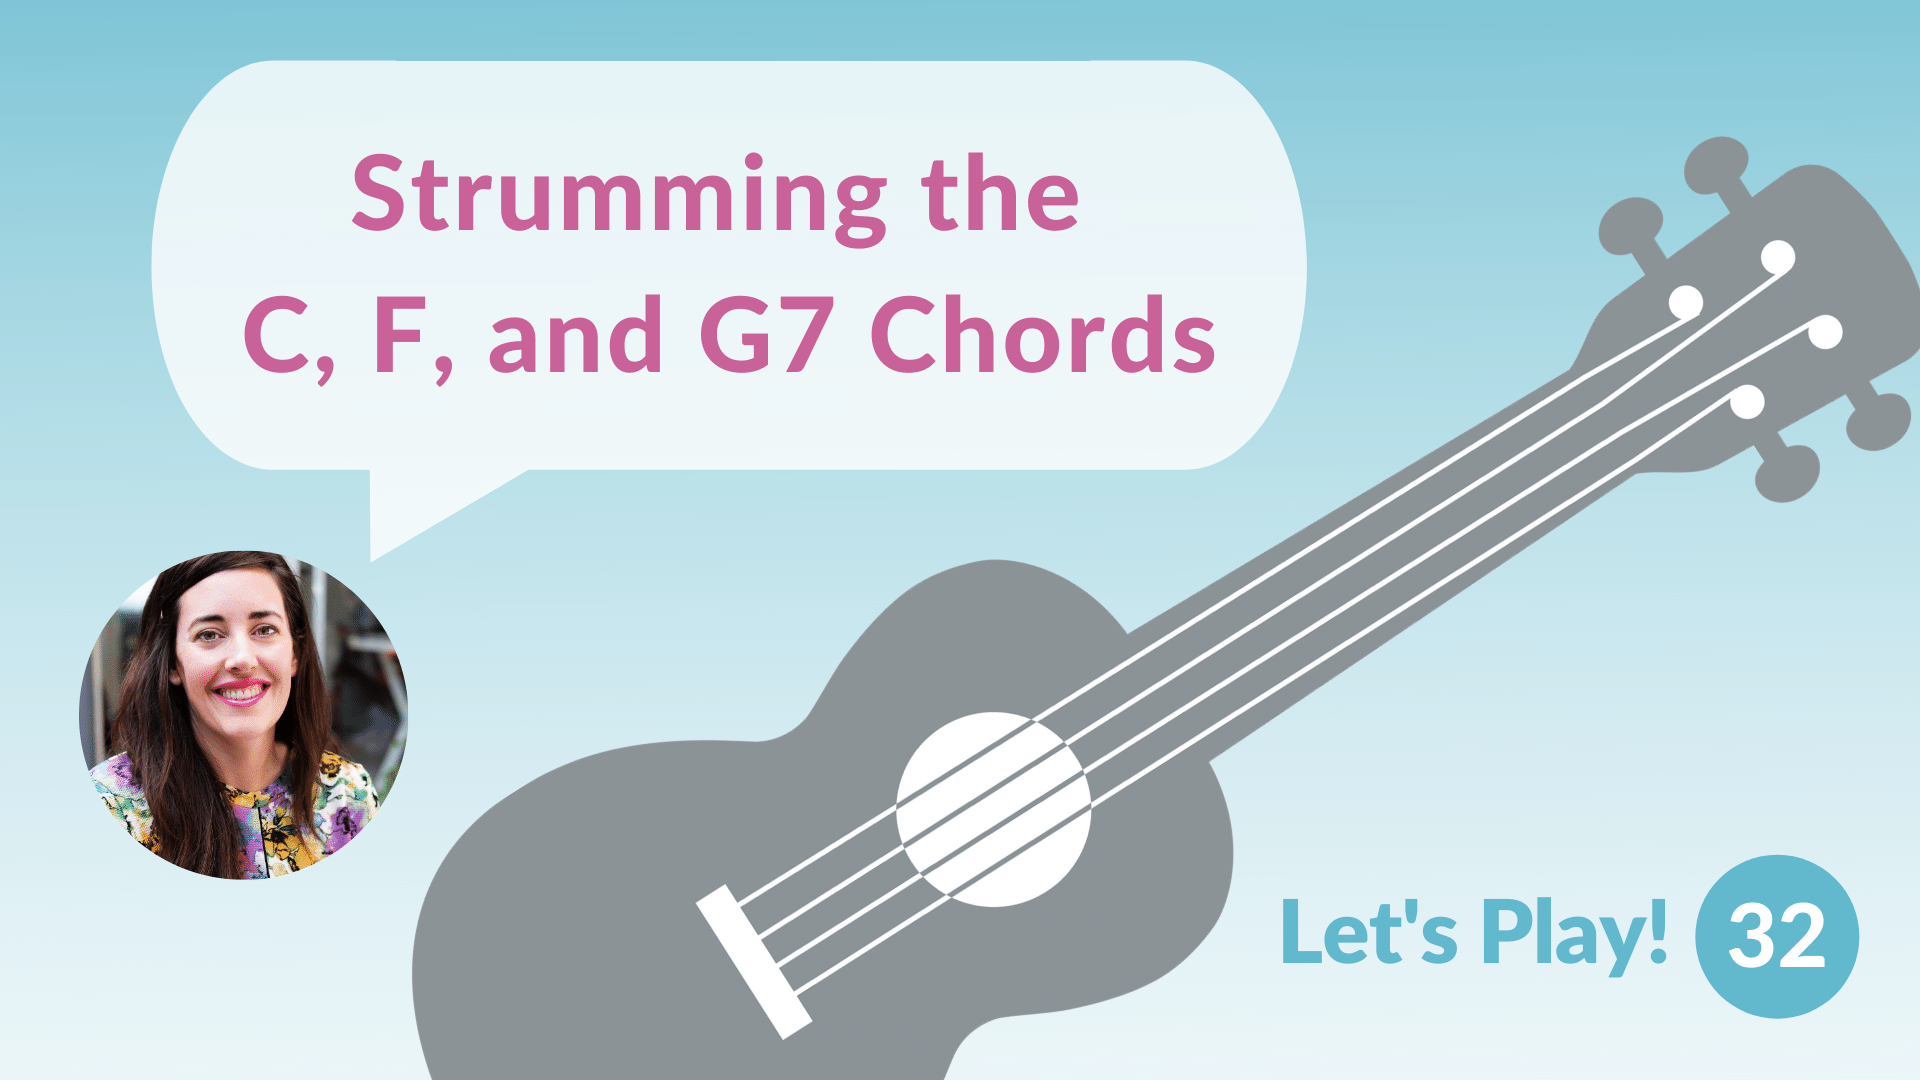 Strum the C, F, and G7 Chords